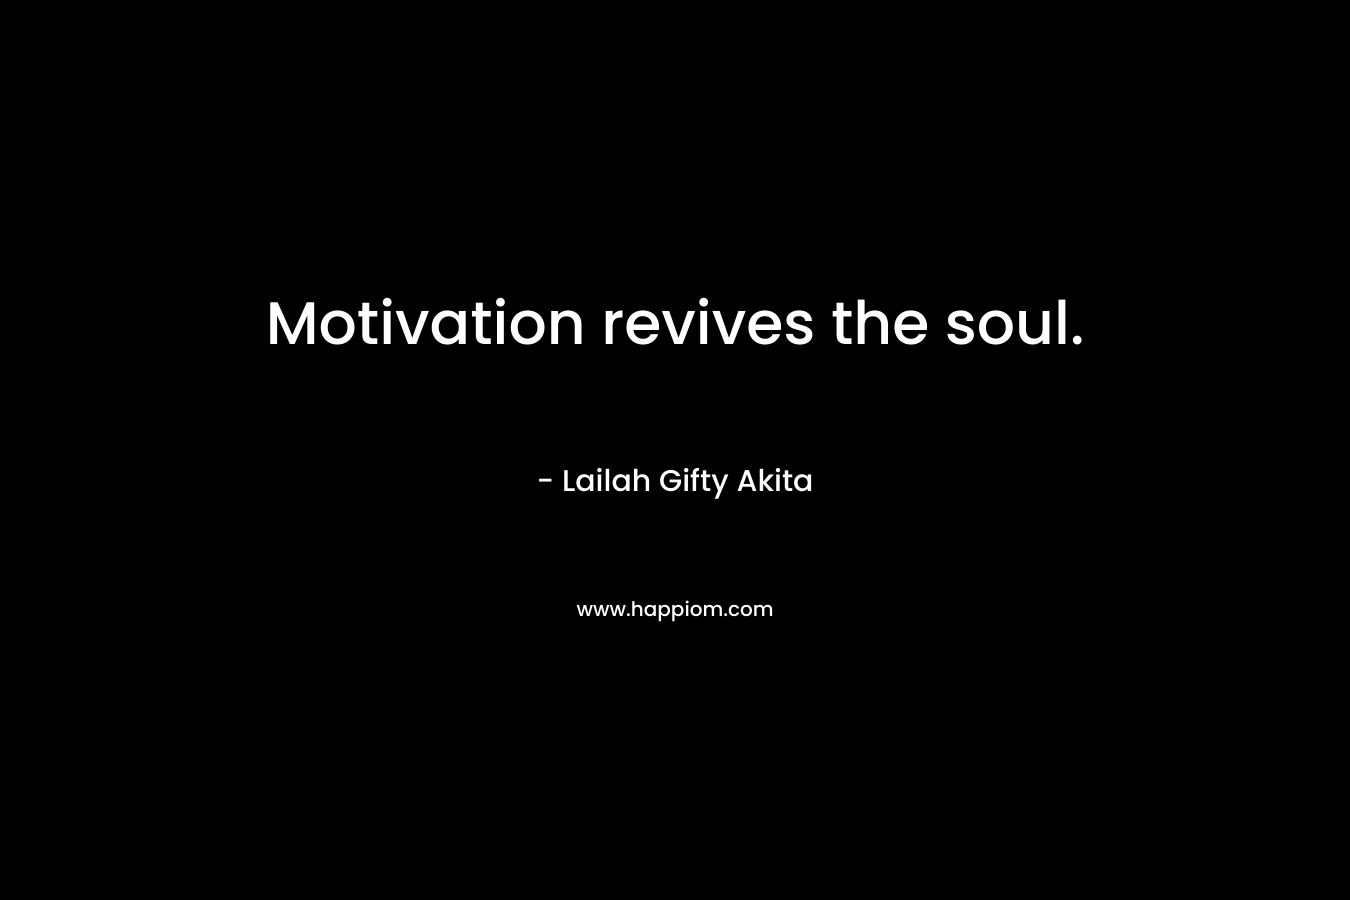 Motivation revives the soul. – Lailah Gifty Akita